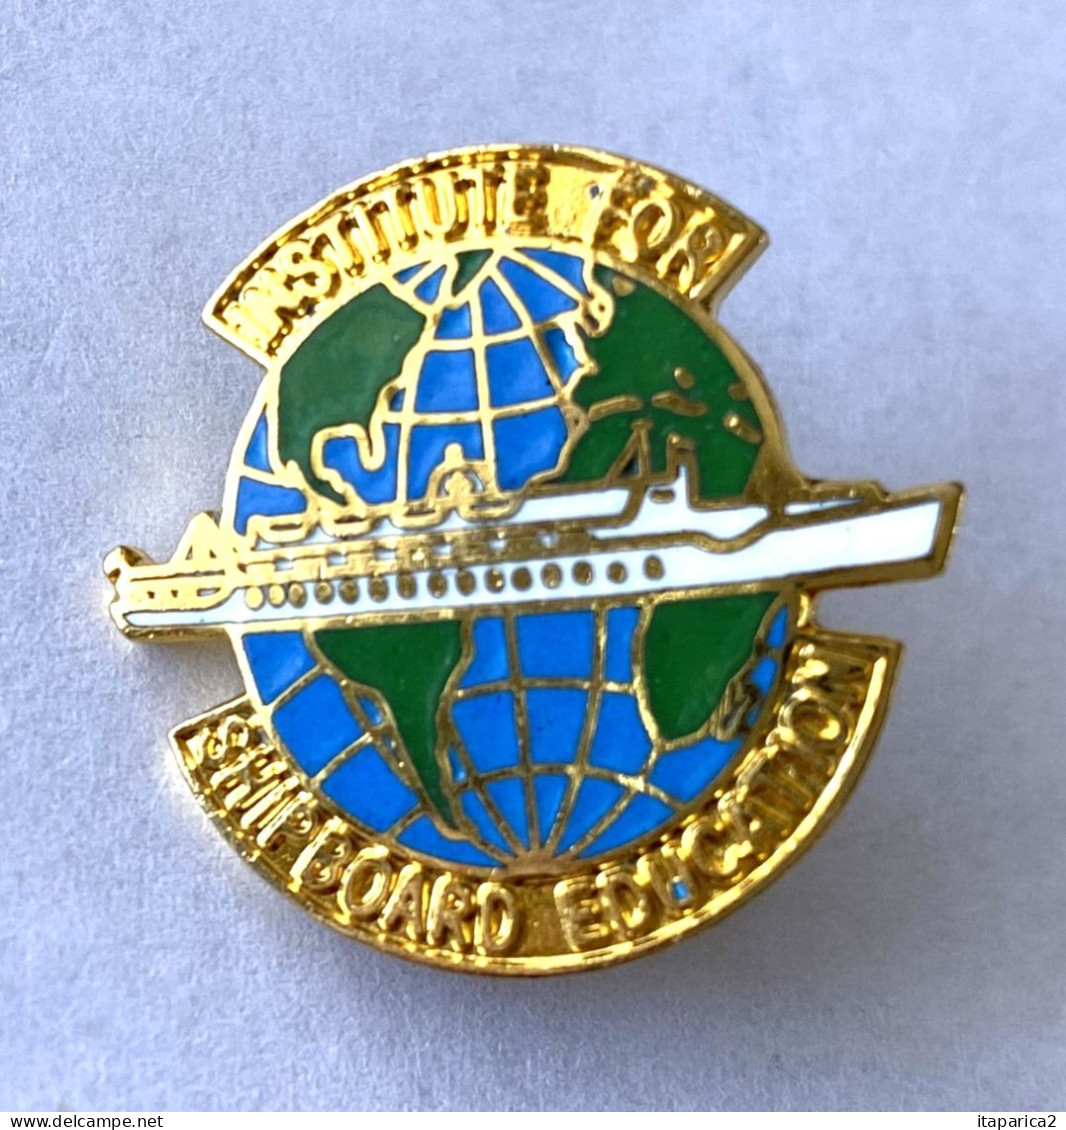 PINS BATEAUX INSTITUTE FOR SHIPBOARD EDUCATION / GLOBE TERRESTRE / Signé AD PAX / 33NAT - Boats